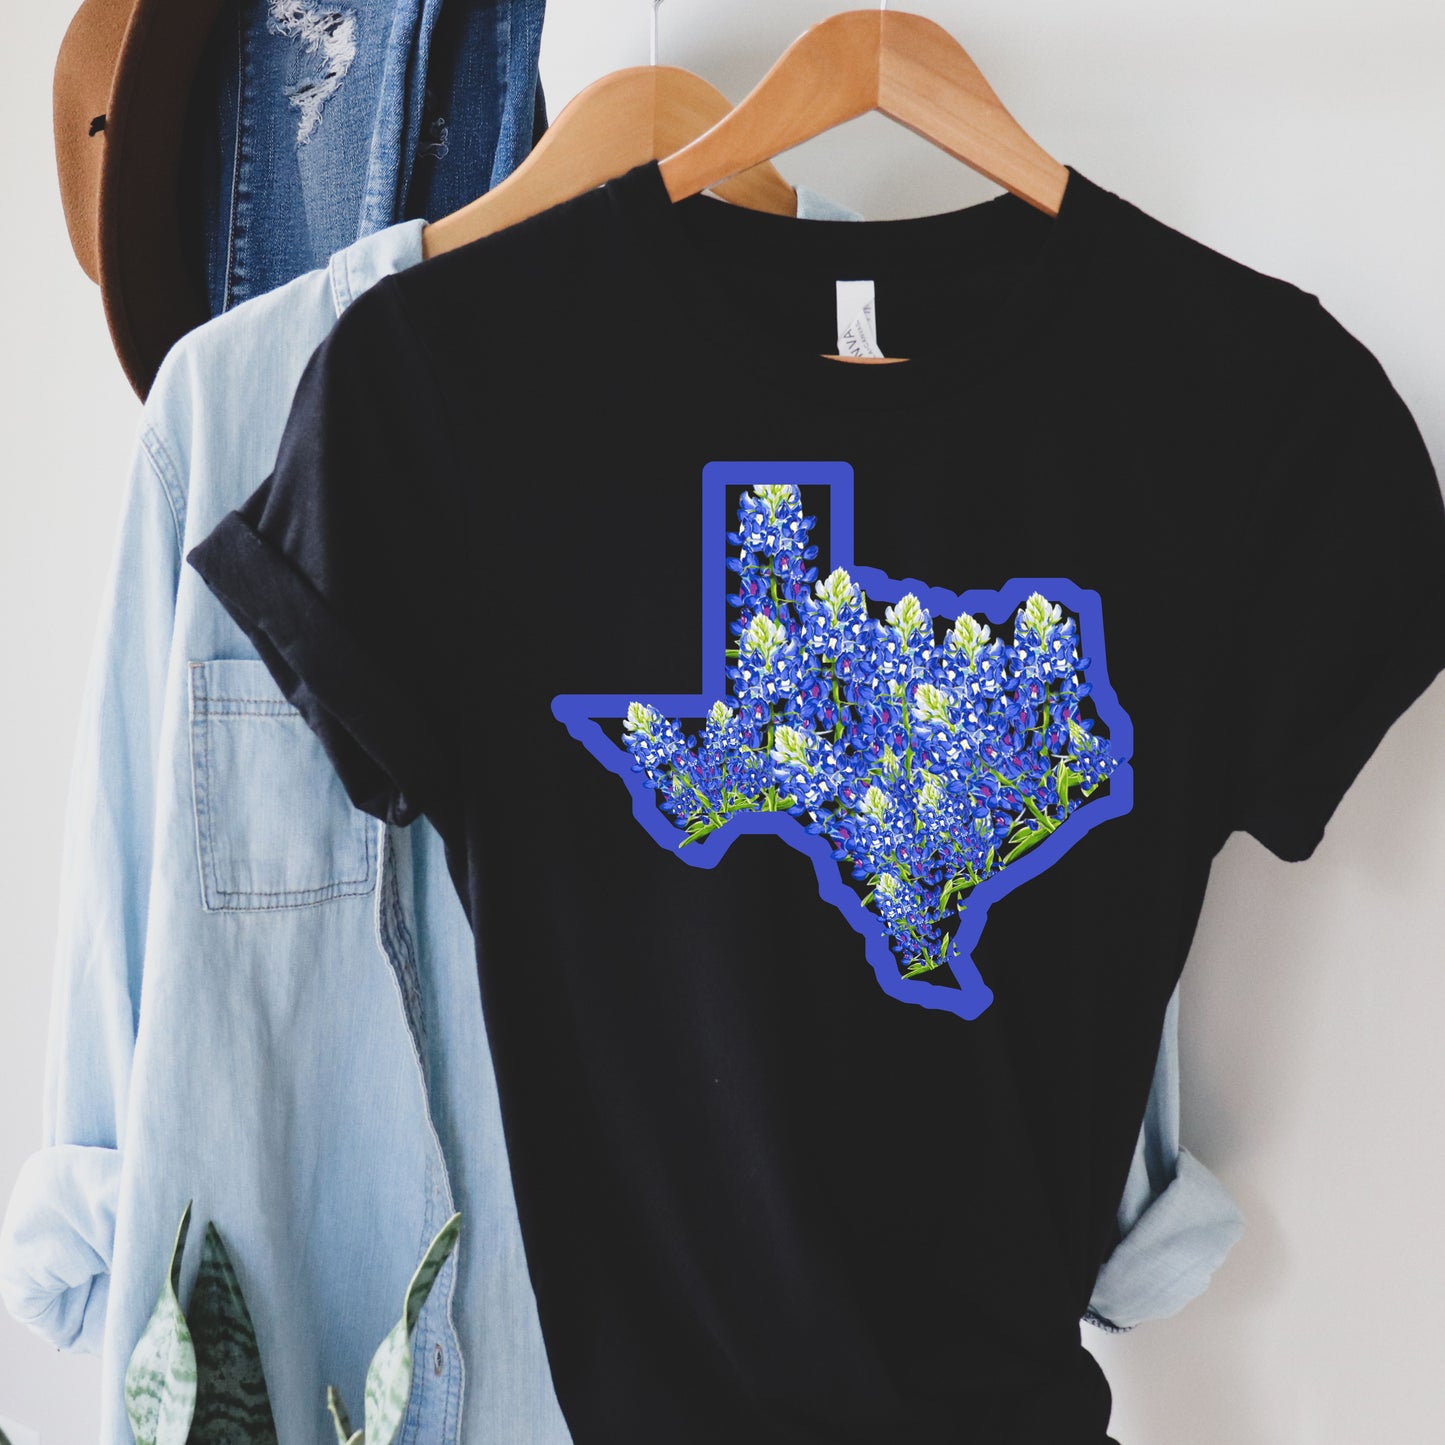 Texas with Bluebonnets Jersey Short Sleeve Tee, Bluebonnets Tshirt, Inspirational Tshirt, Inspiring Shirt, Gifts for Her, Mother's Day Gift